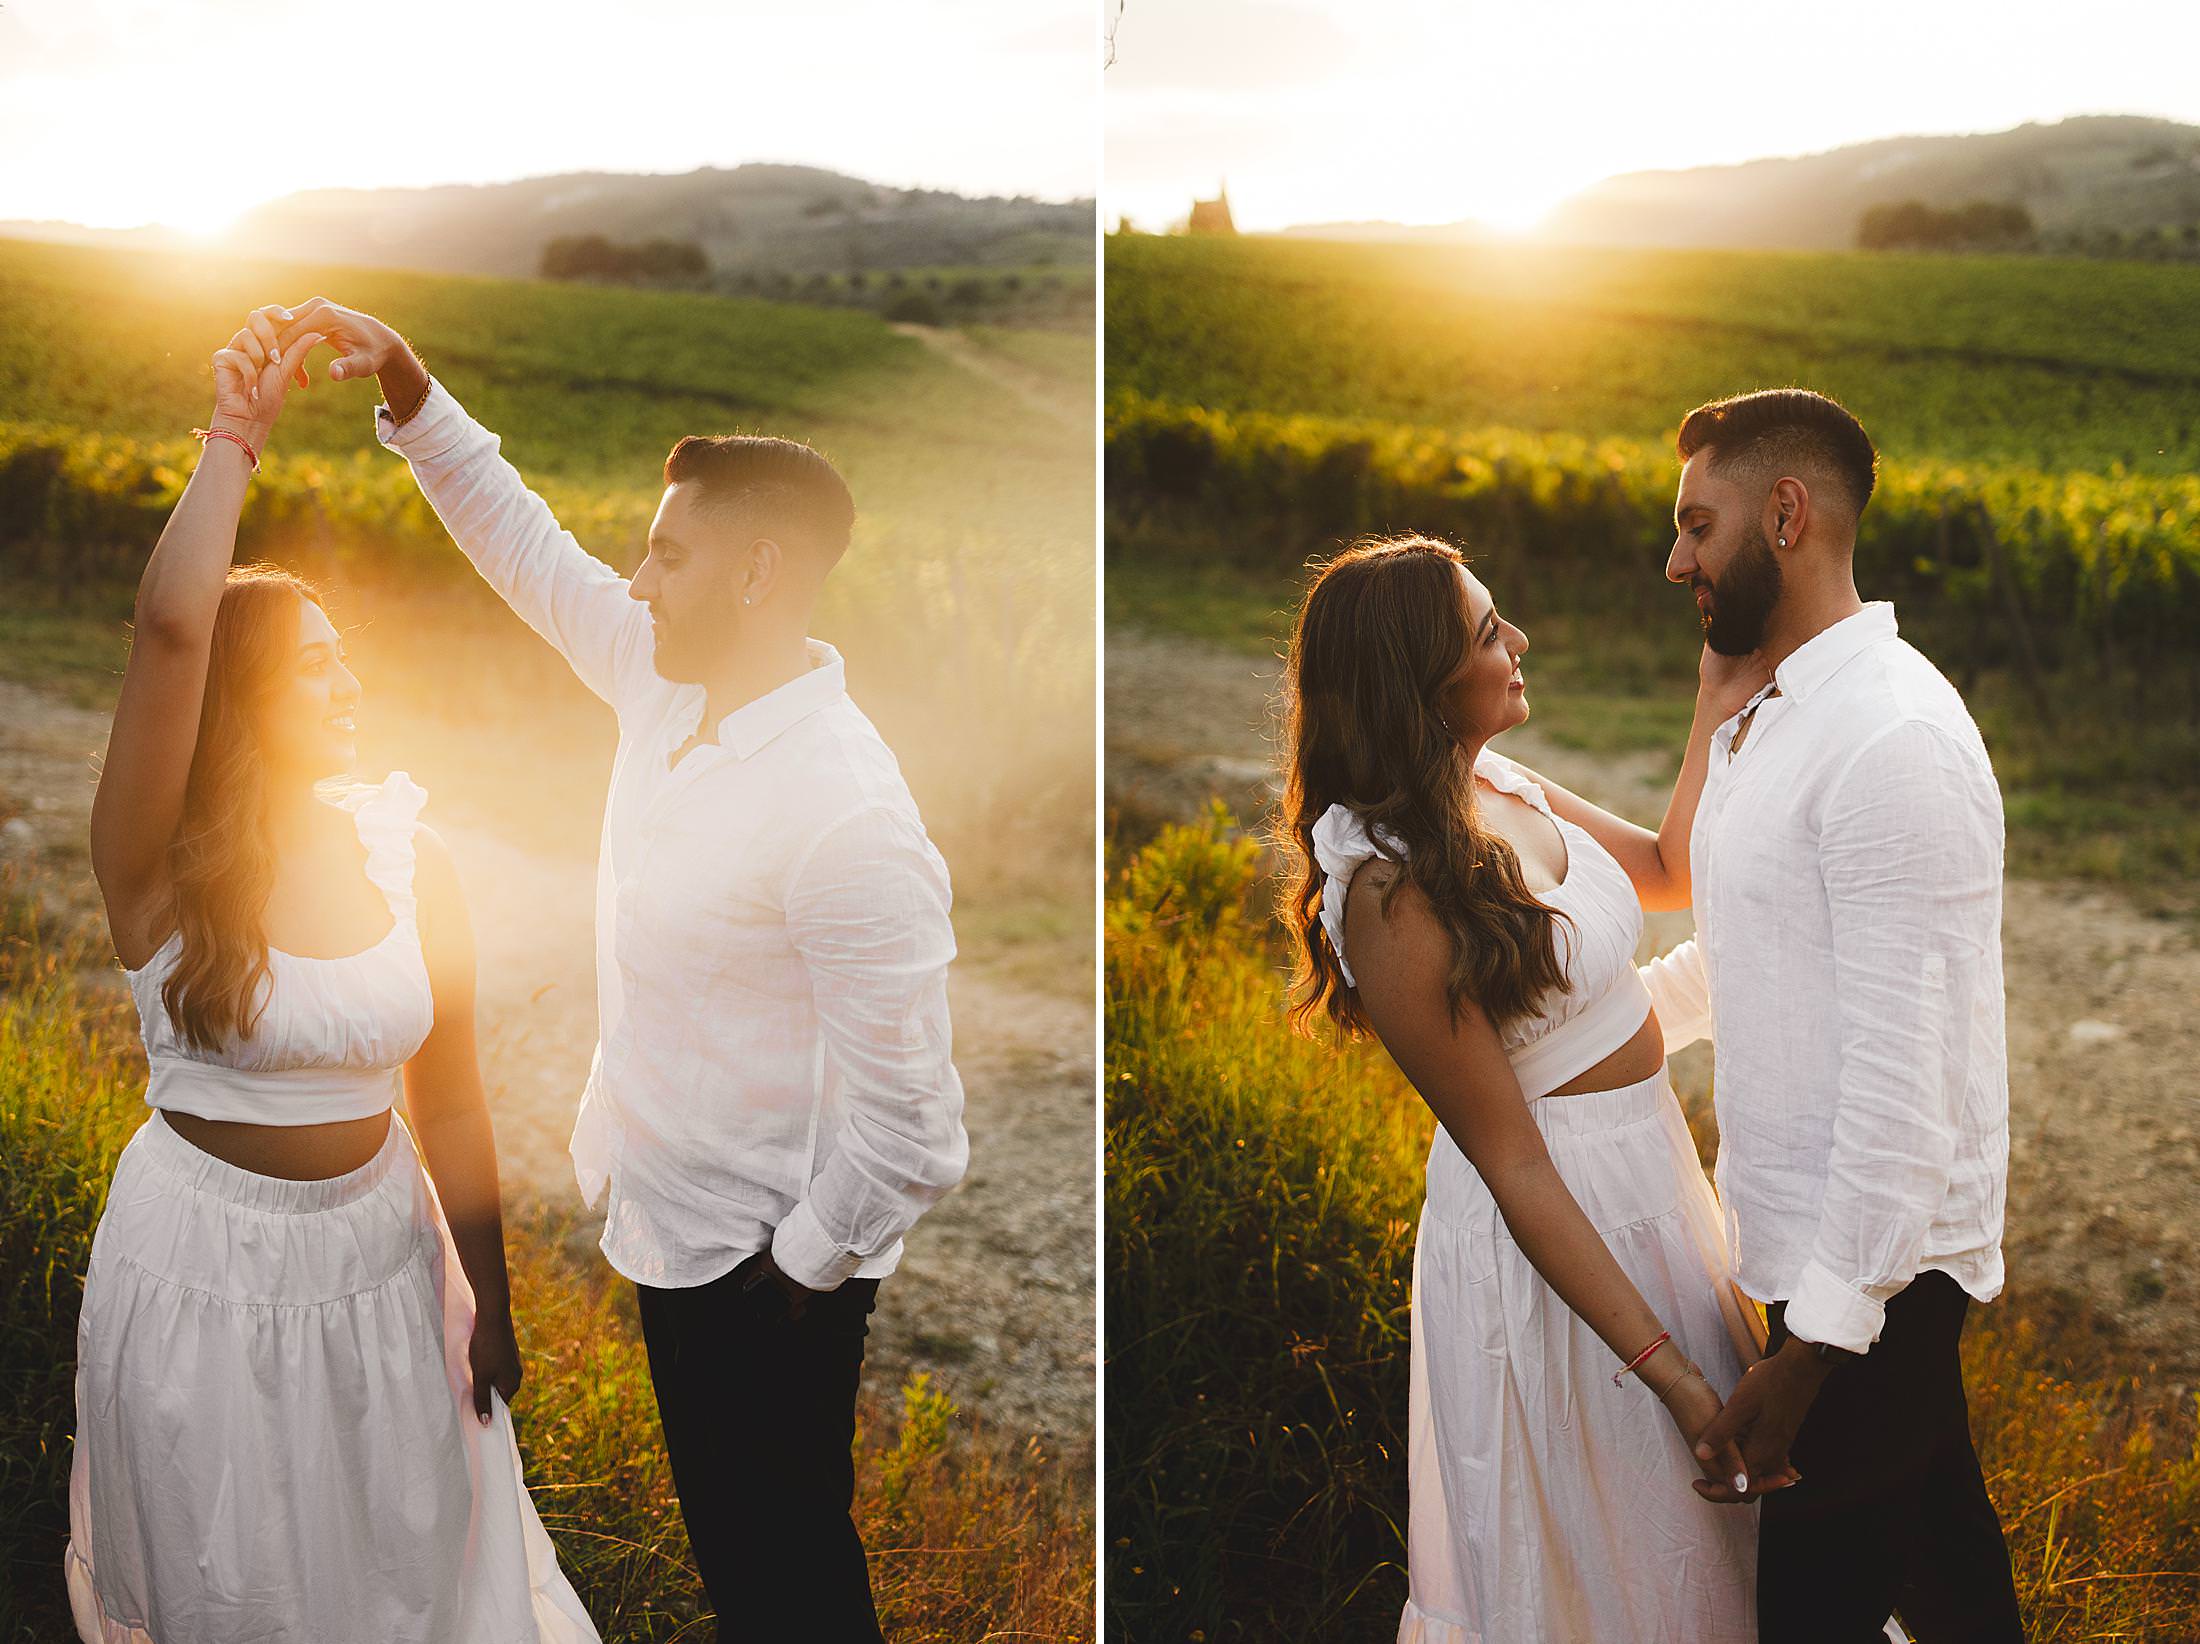 Unforgettable engagement proposal photo shoot in golden hour Chianti countryside with vineyard as background